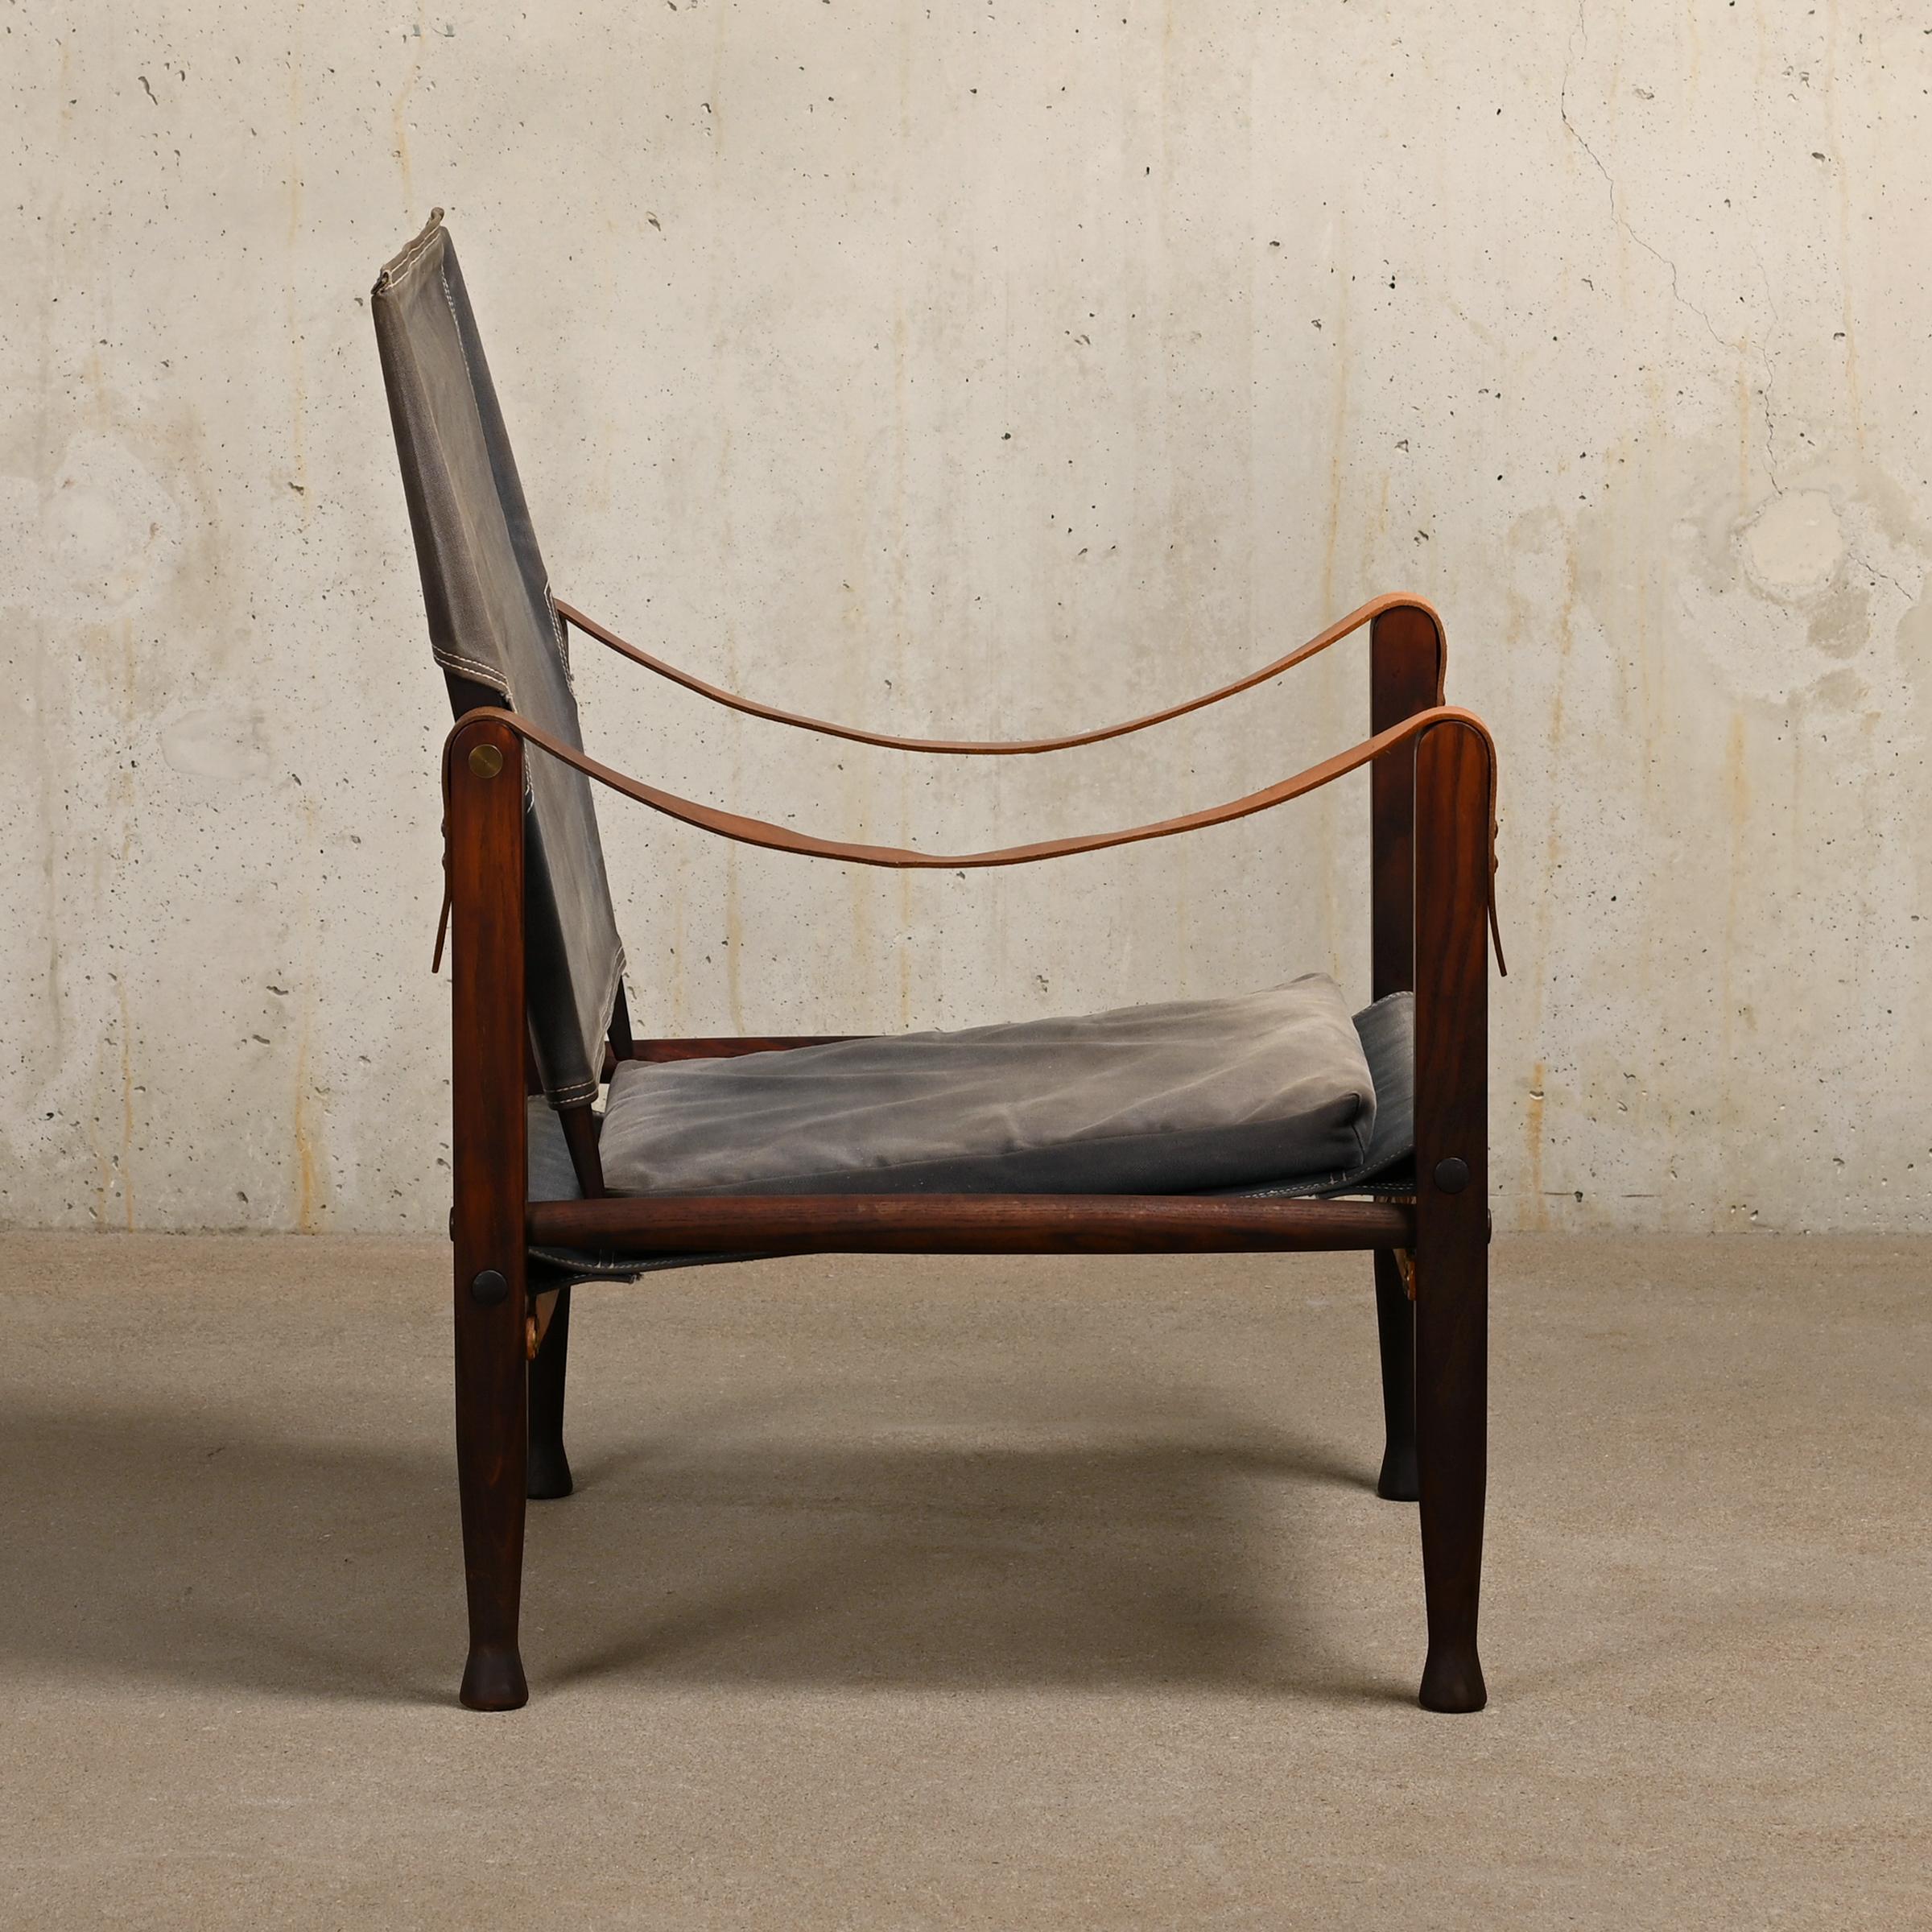 Kaare Klint Safari Chair in Grey Canvas and Dark Stained Ash for Rud Rasmussen 1